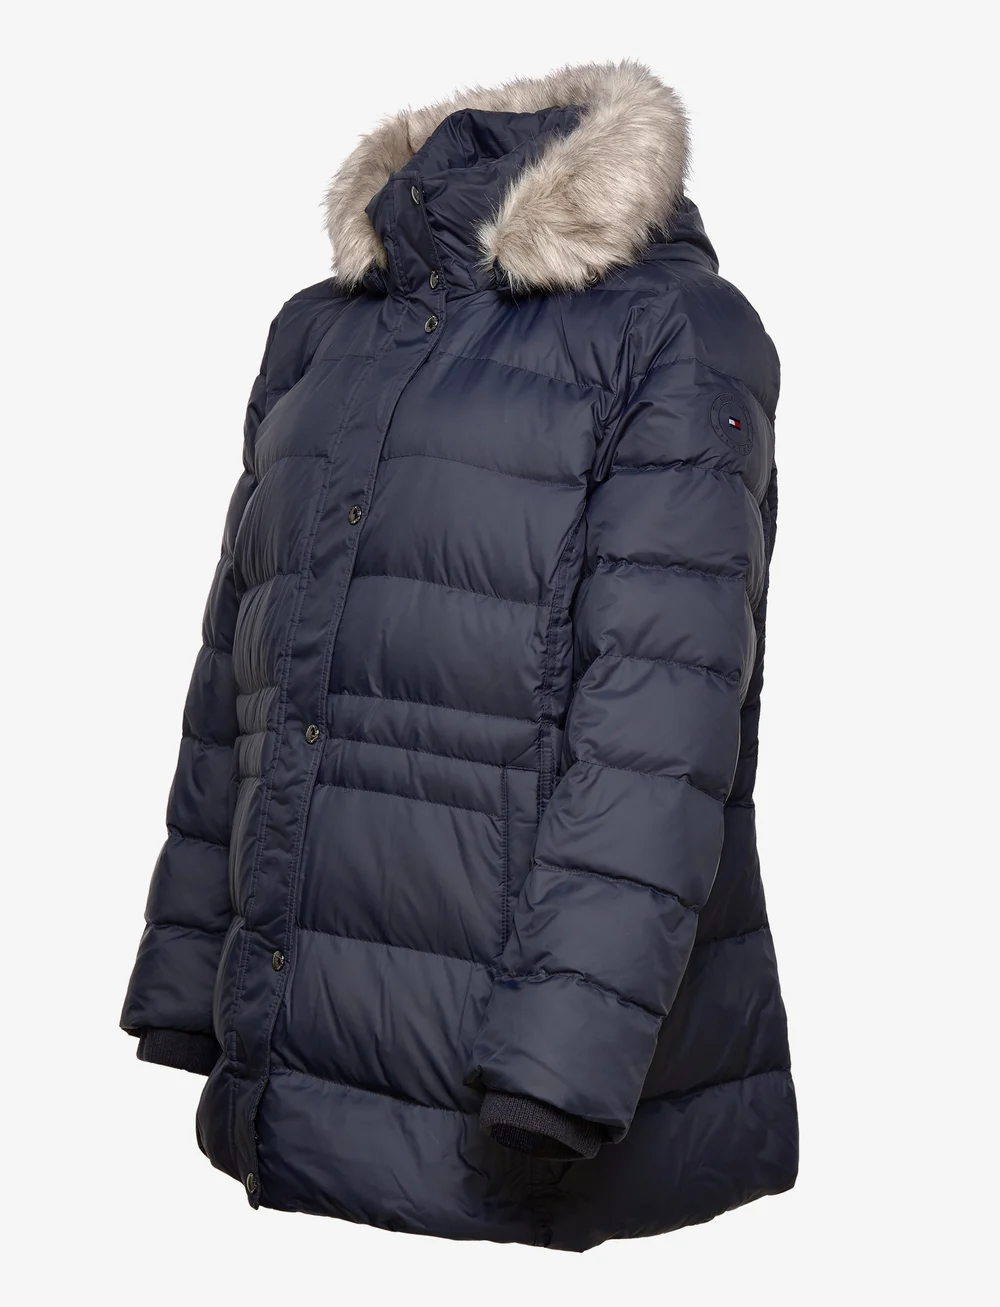 Tommy Hilfiger Crv Th Ess Tyra Down Jkt Fur - 329.90 €. Buy Padded Coats  from Tommy Hilfiger online at Boozt.com. Fast delivery and easy returns